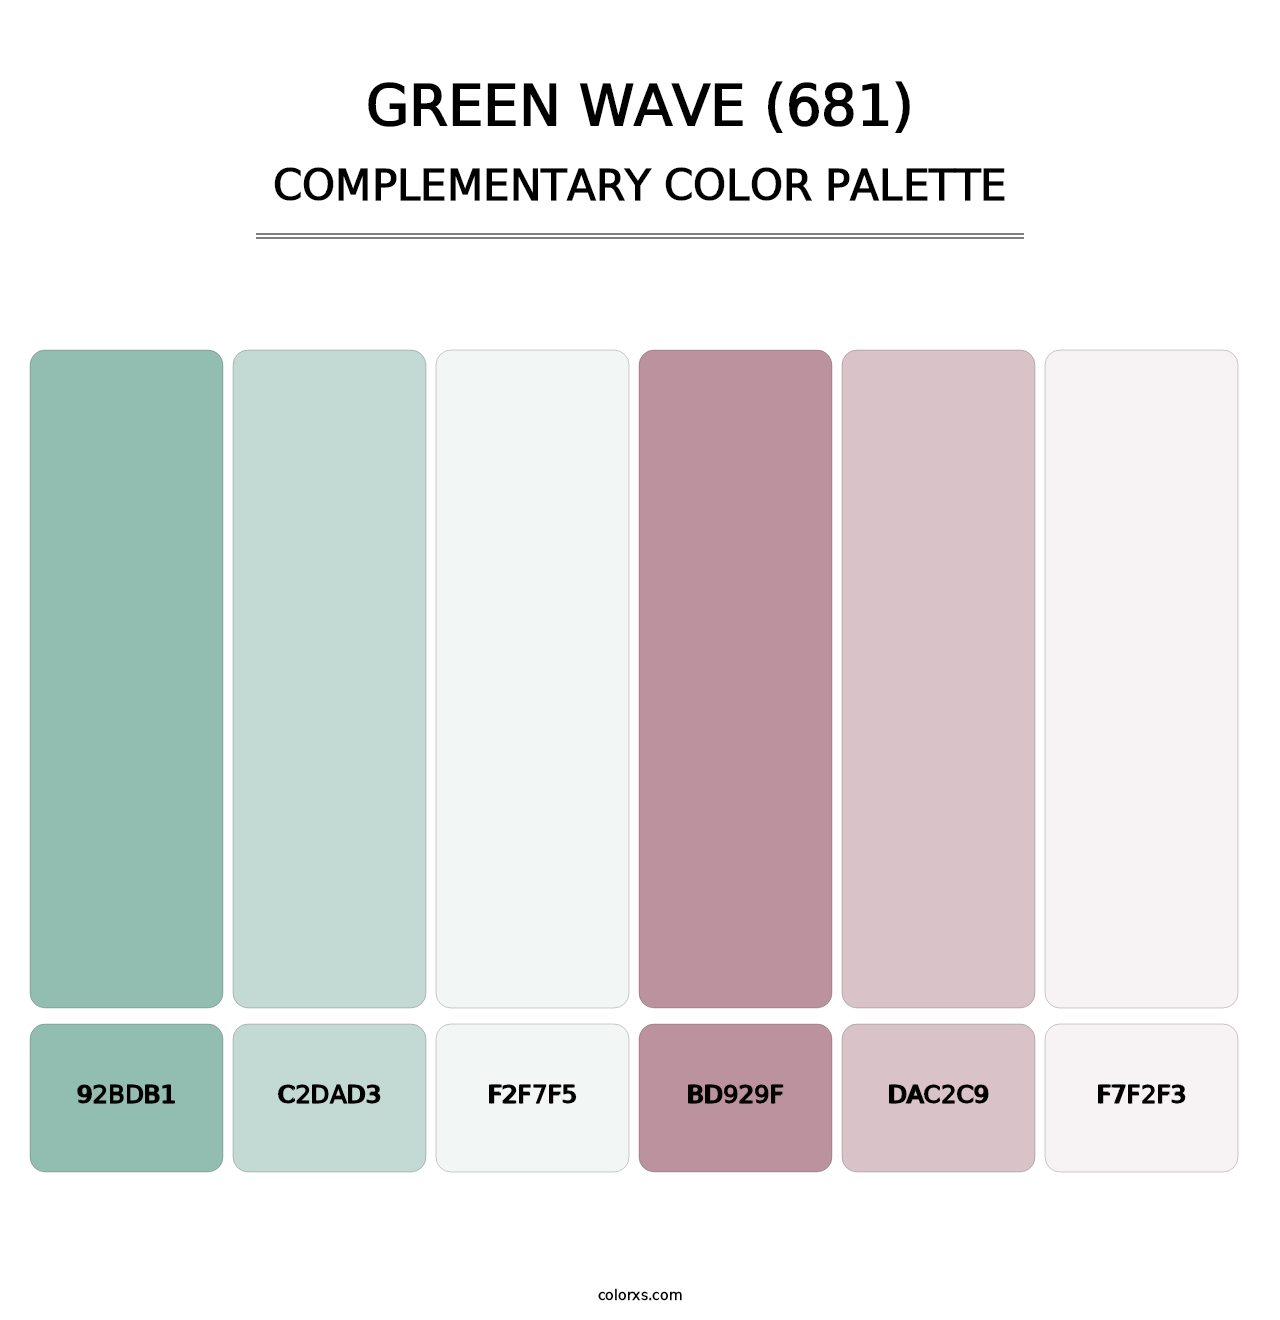 Green Wave (681) - Complementary Color Palette